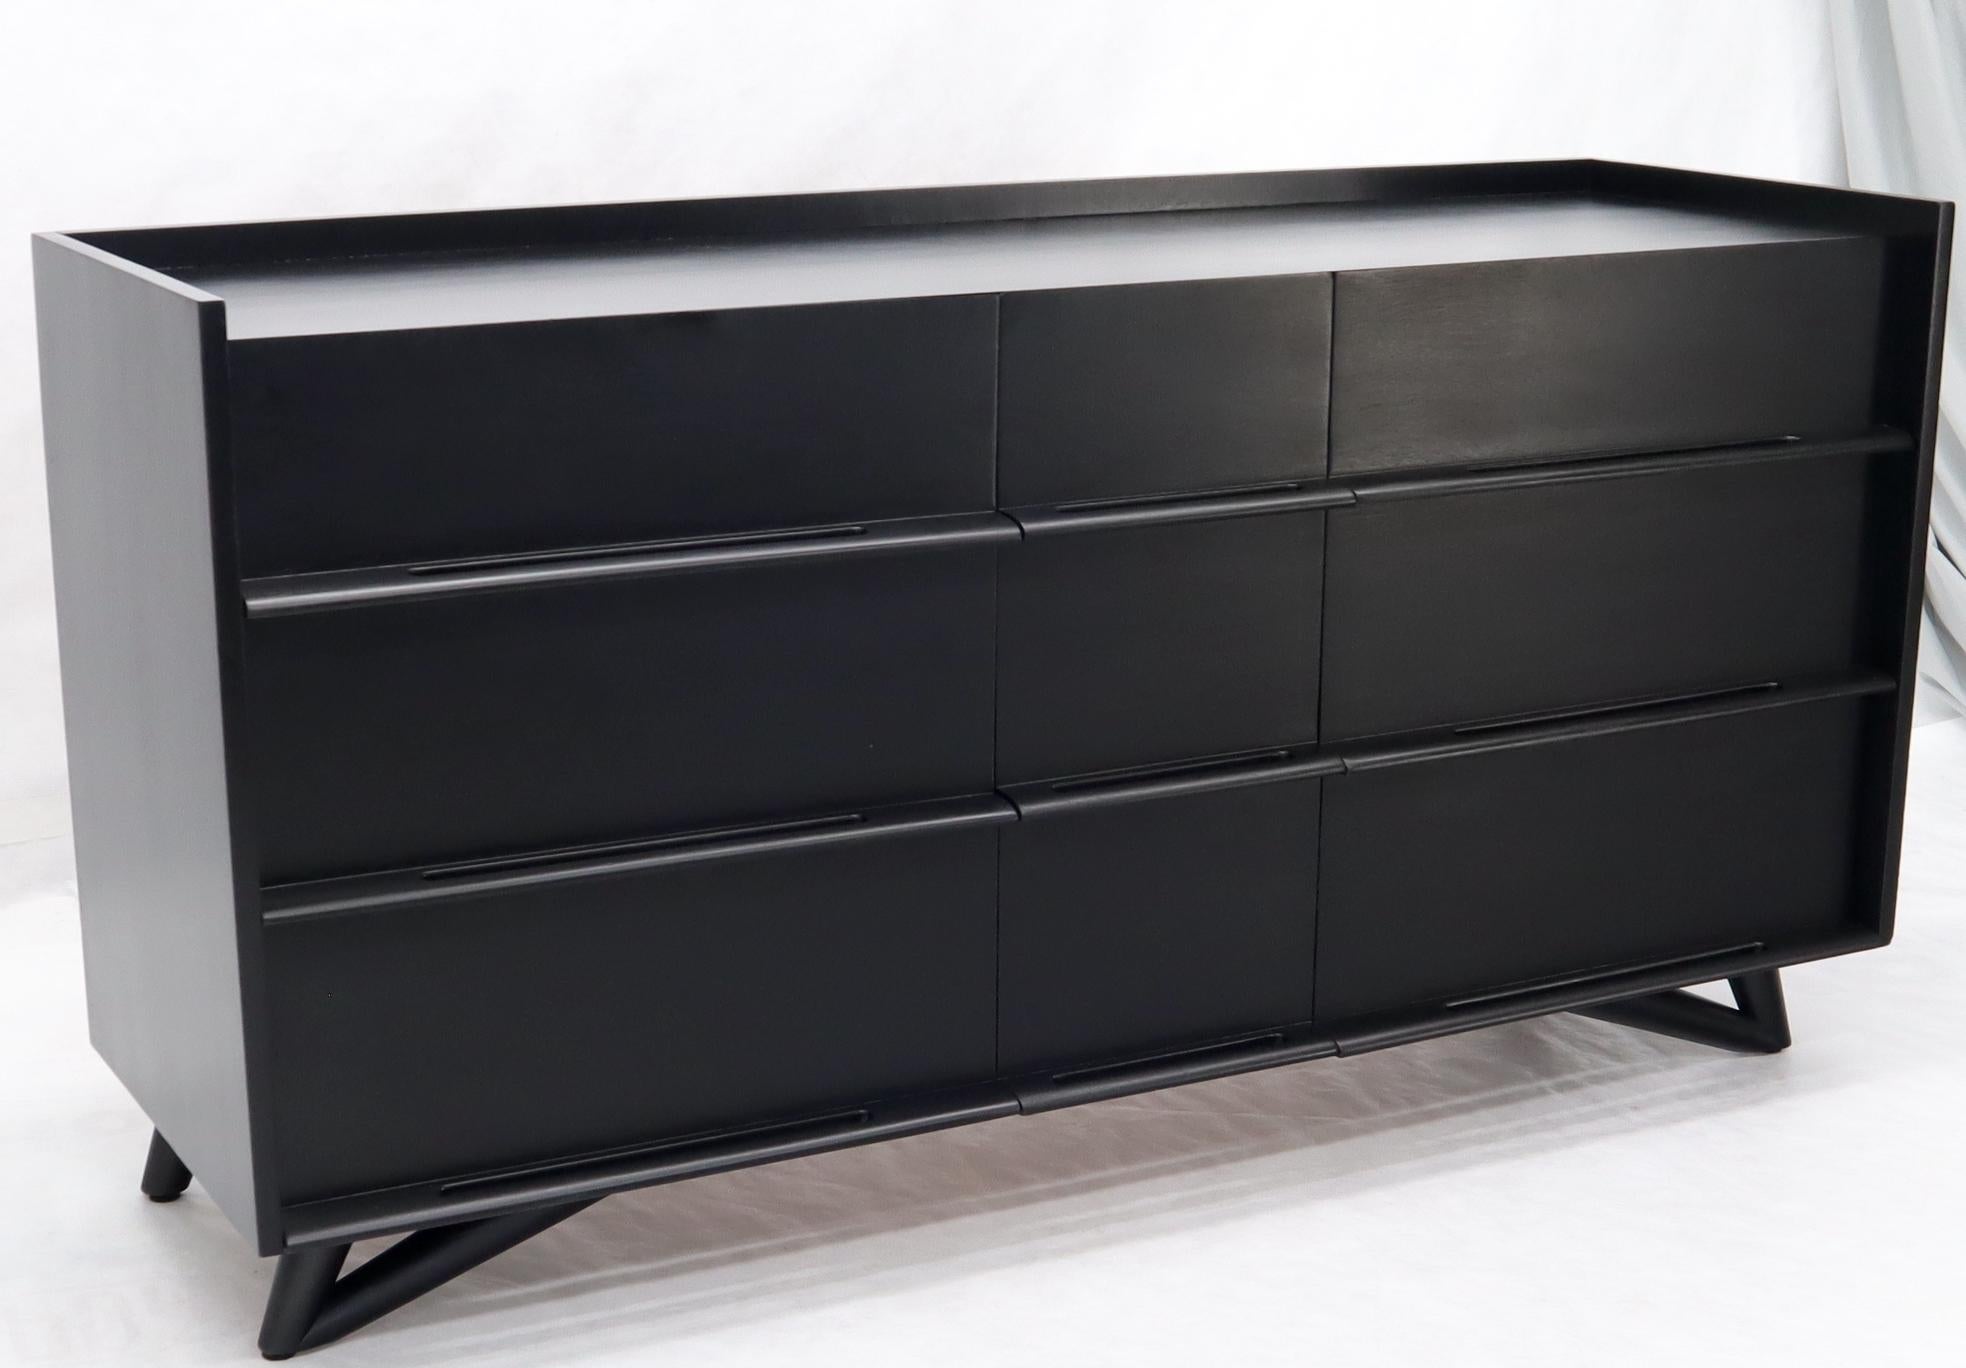 Lacquered Black Lacquer Gallery Top Pieced Sculptural Wood Pulls Handles Dresser Credenza